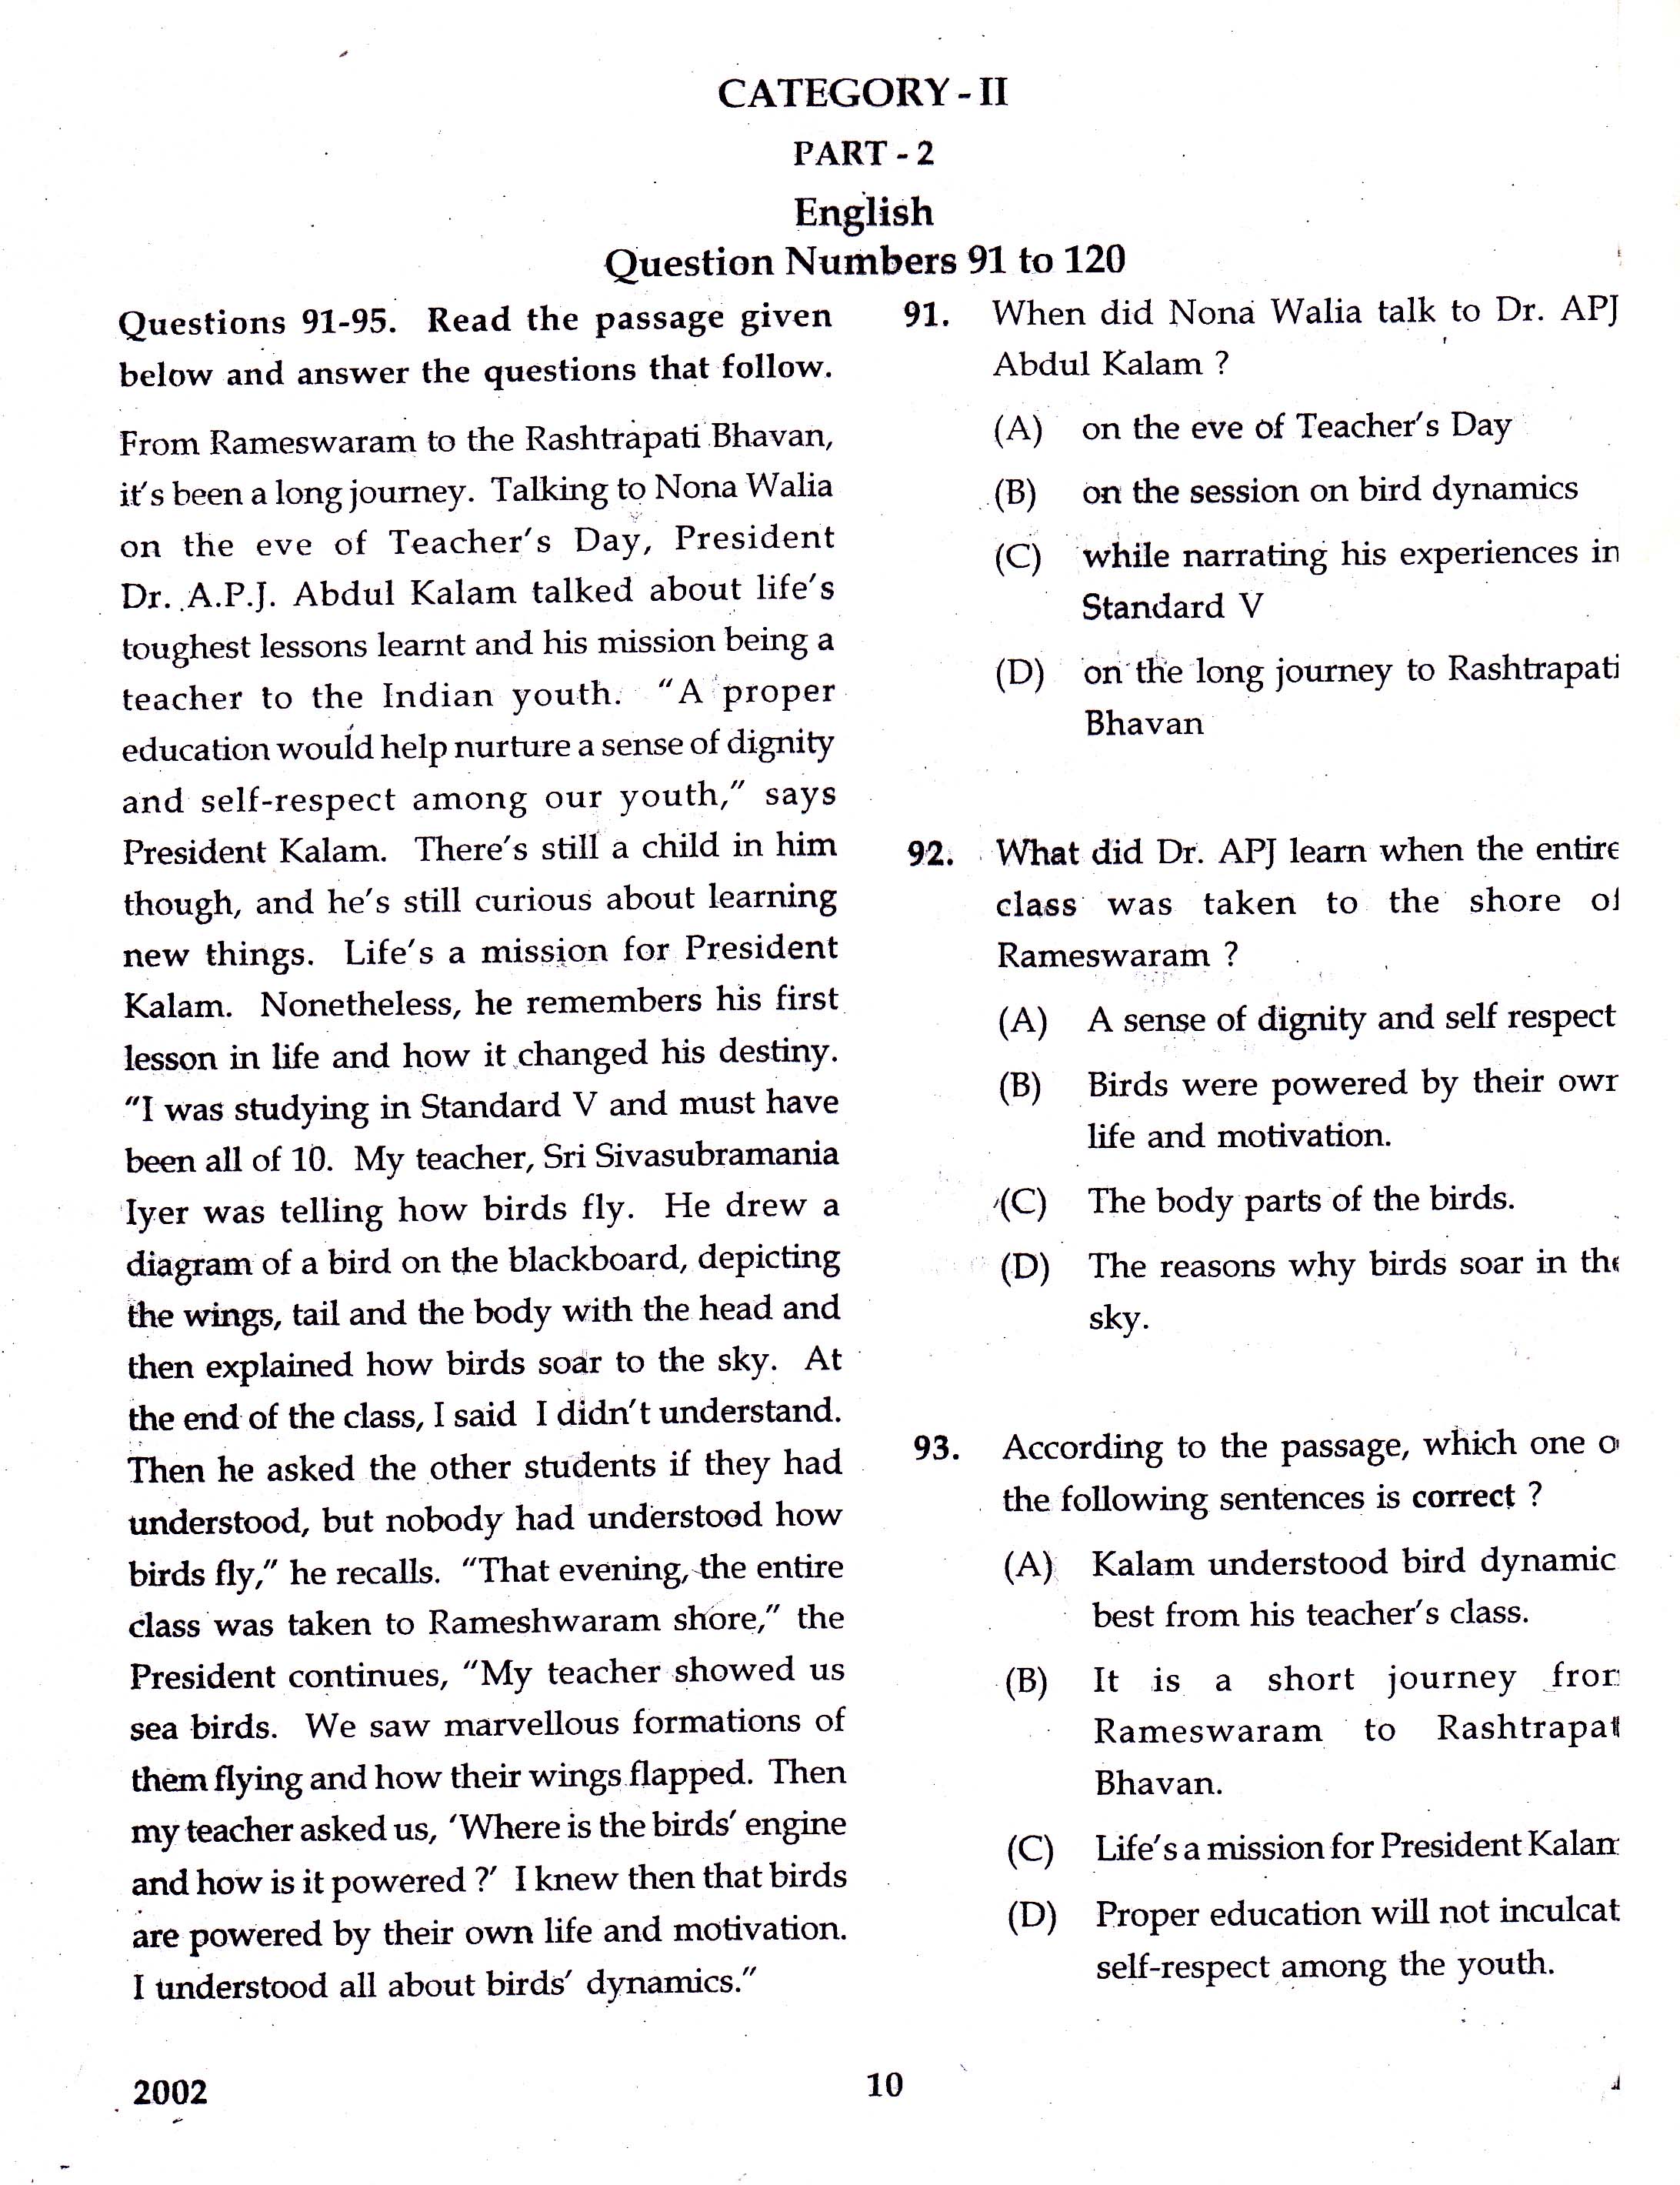 KTET Category II Part 2 English Question Paper with Answers December 2017 1